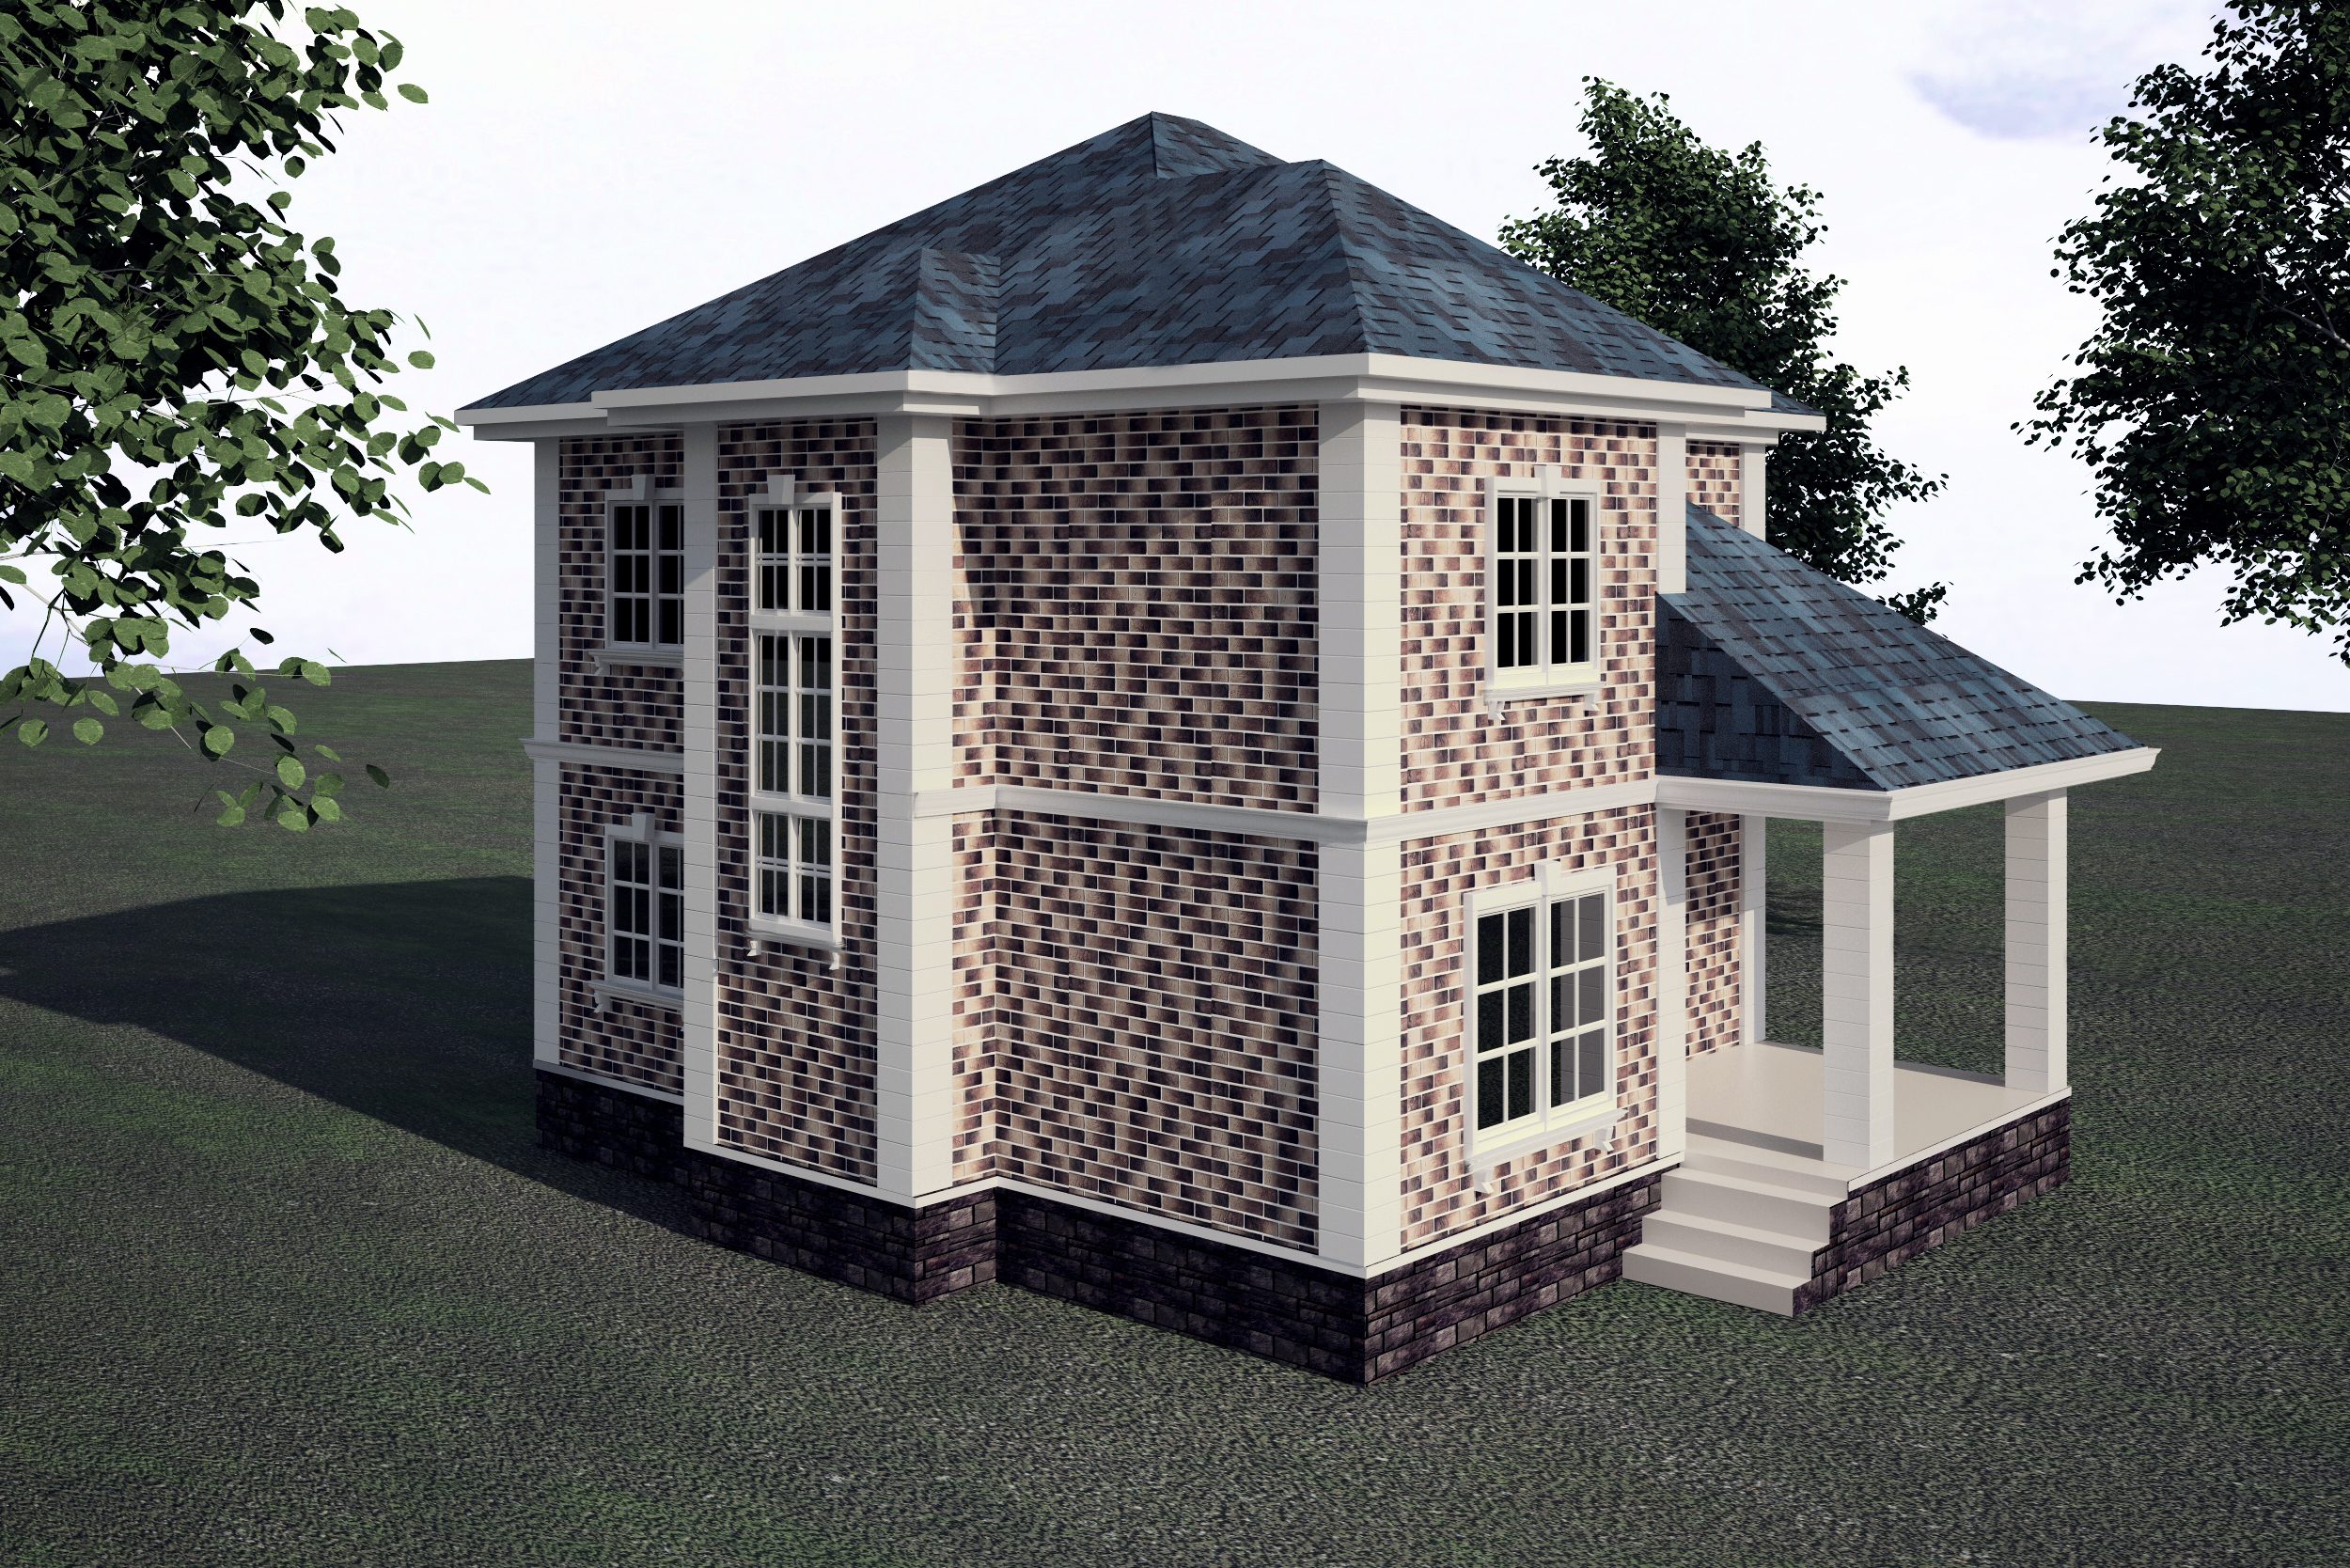 Two-storey house in 3d max vray 3.0 image